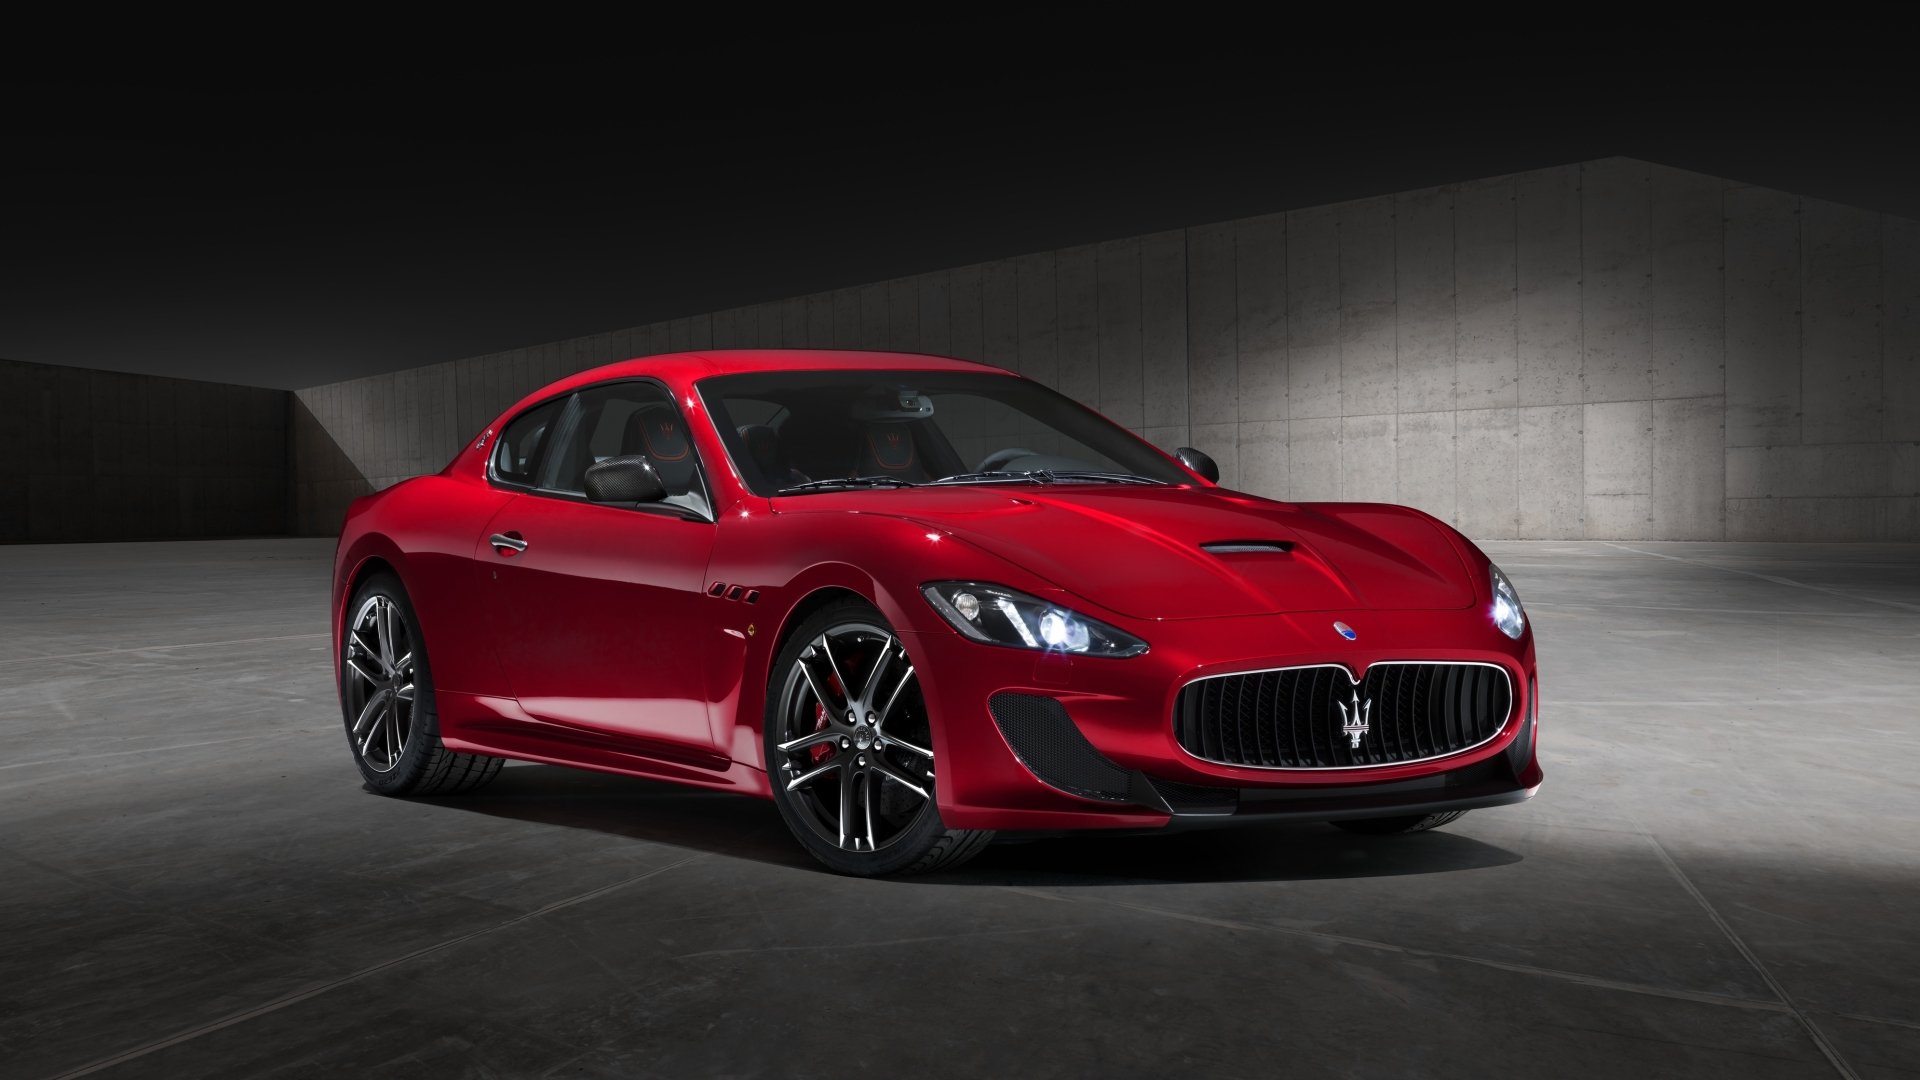 120 Maserati Granturismo Hd Wallpapers Background Images